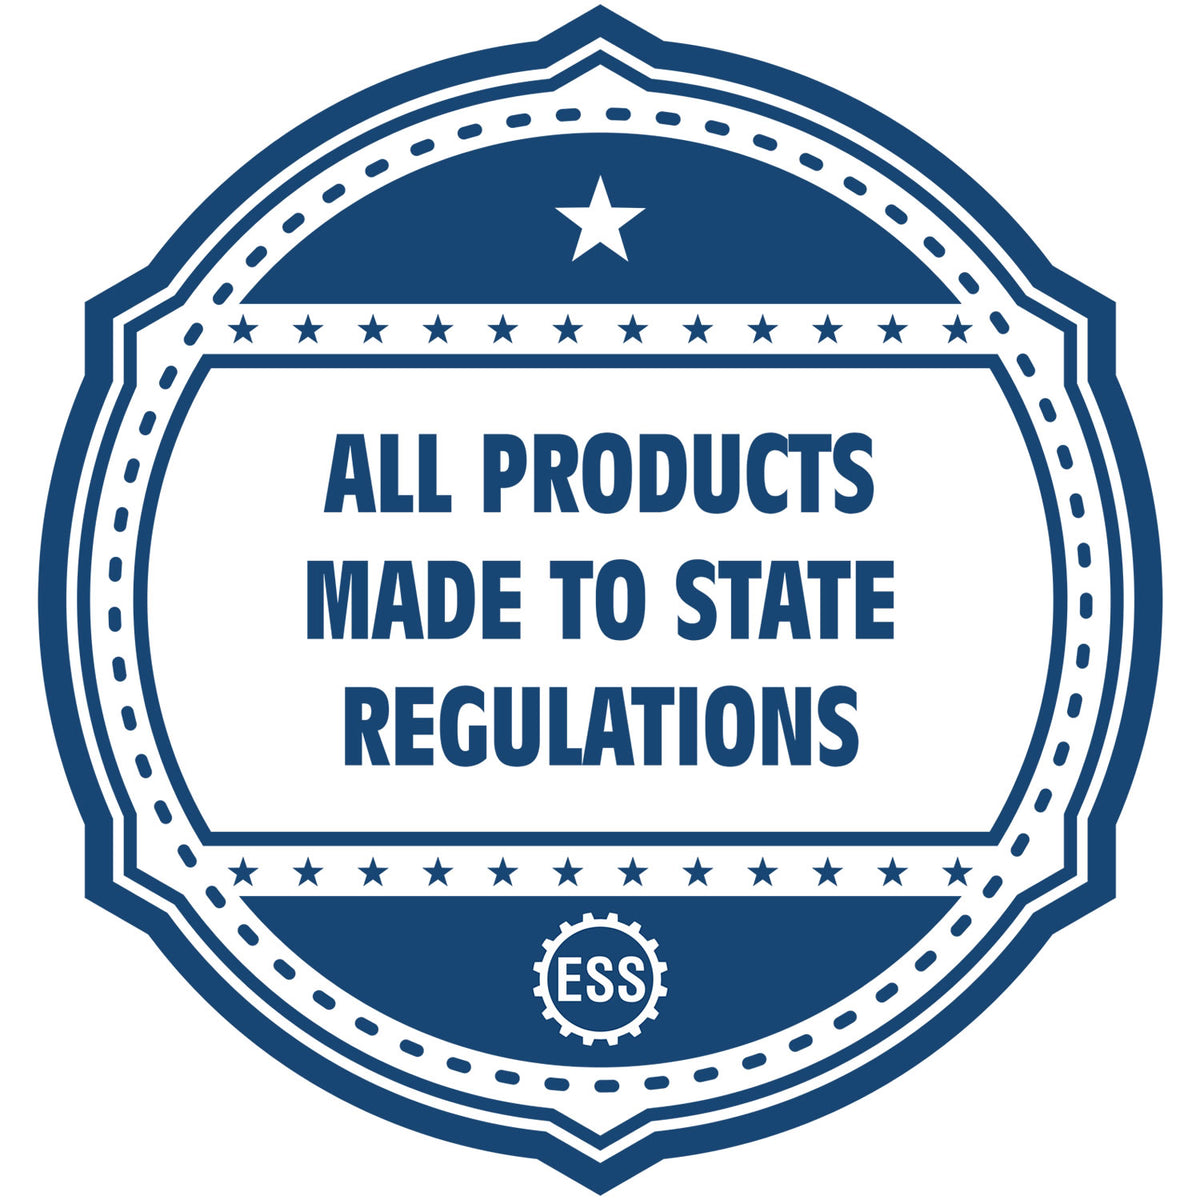 An icon or badge element for the Heavy Duty Cast Iron Washington Engineer Seal Embosser showing that this product is made in compliance with state regulations.